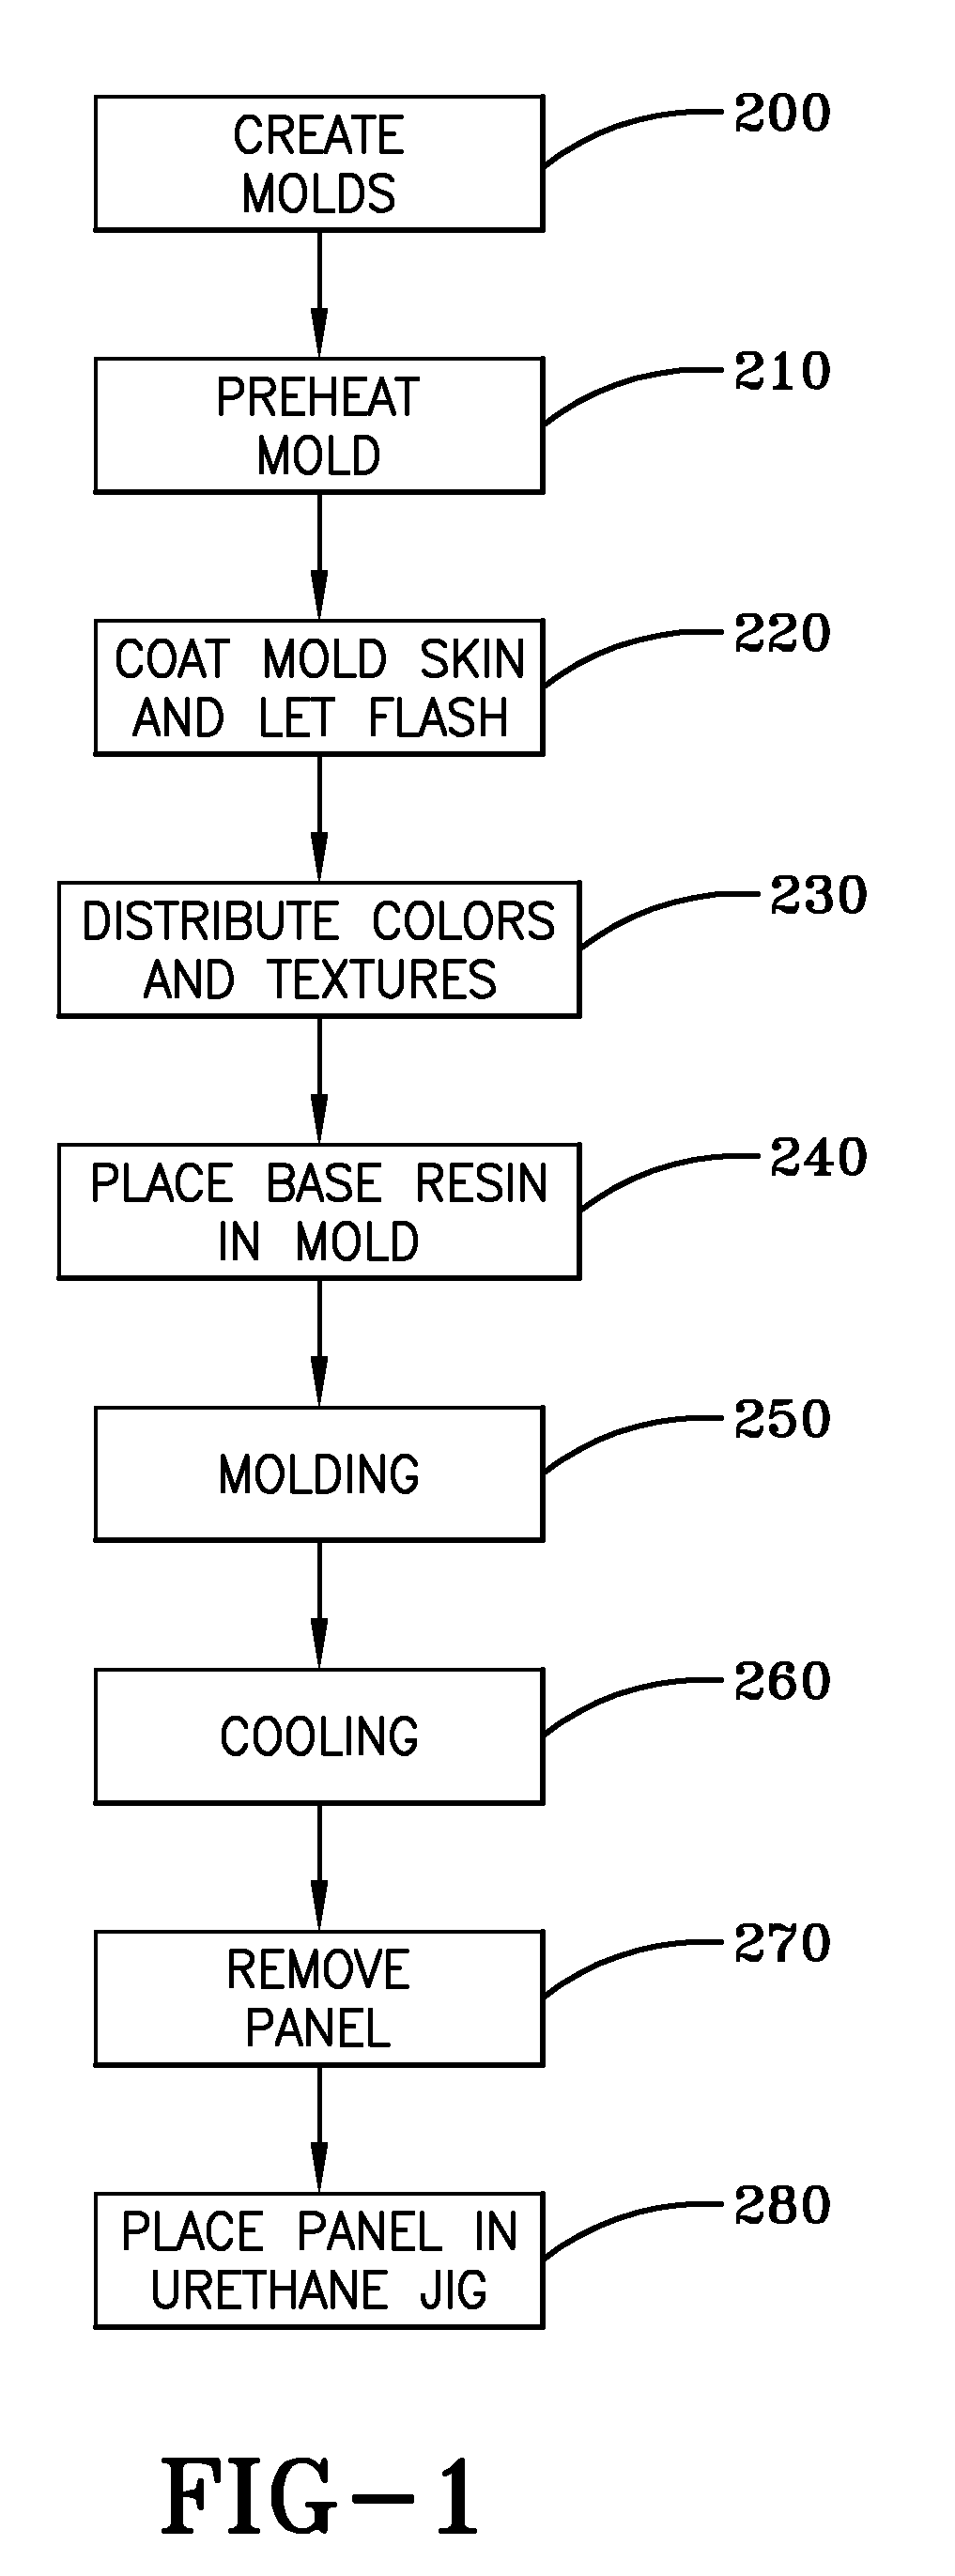 Composition of fillers with plastics for producing superior building materials